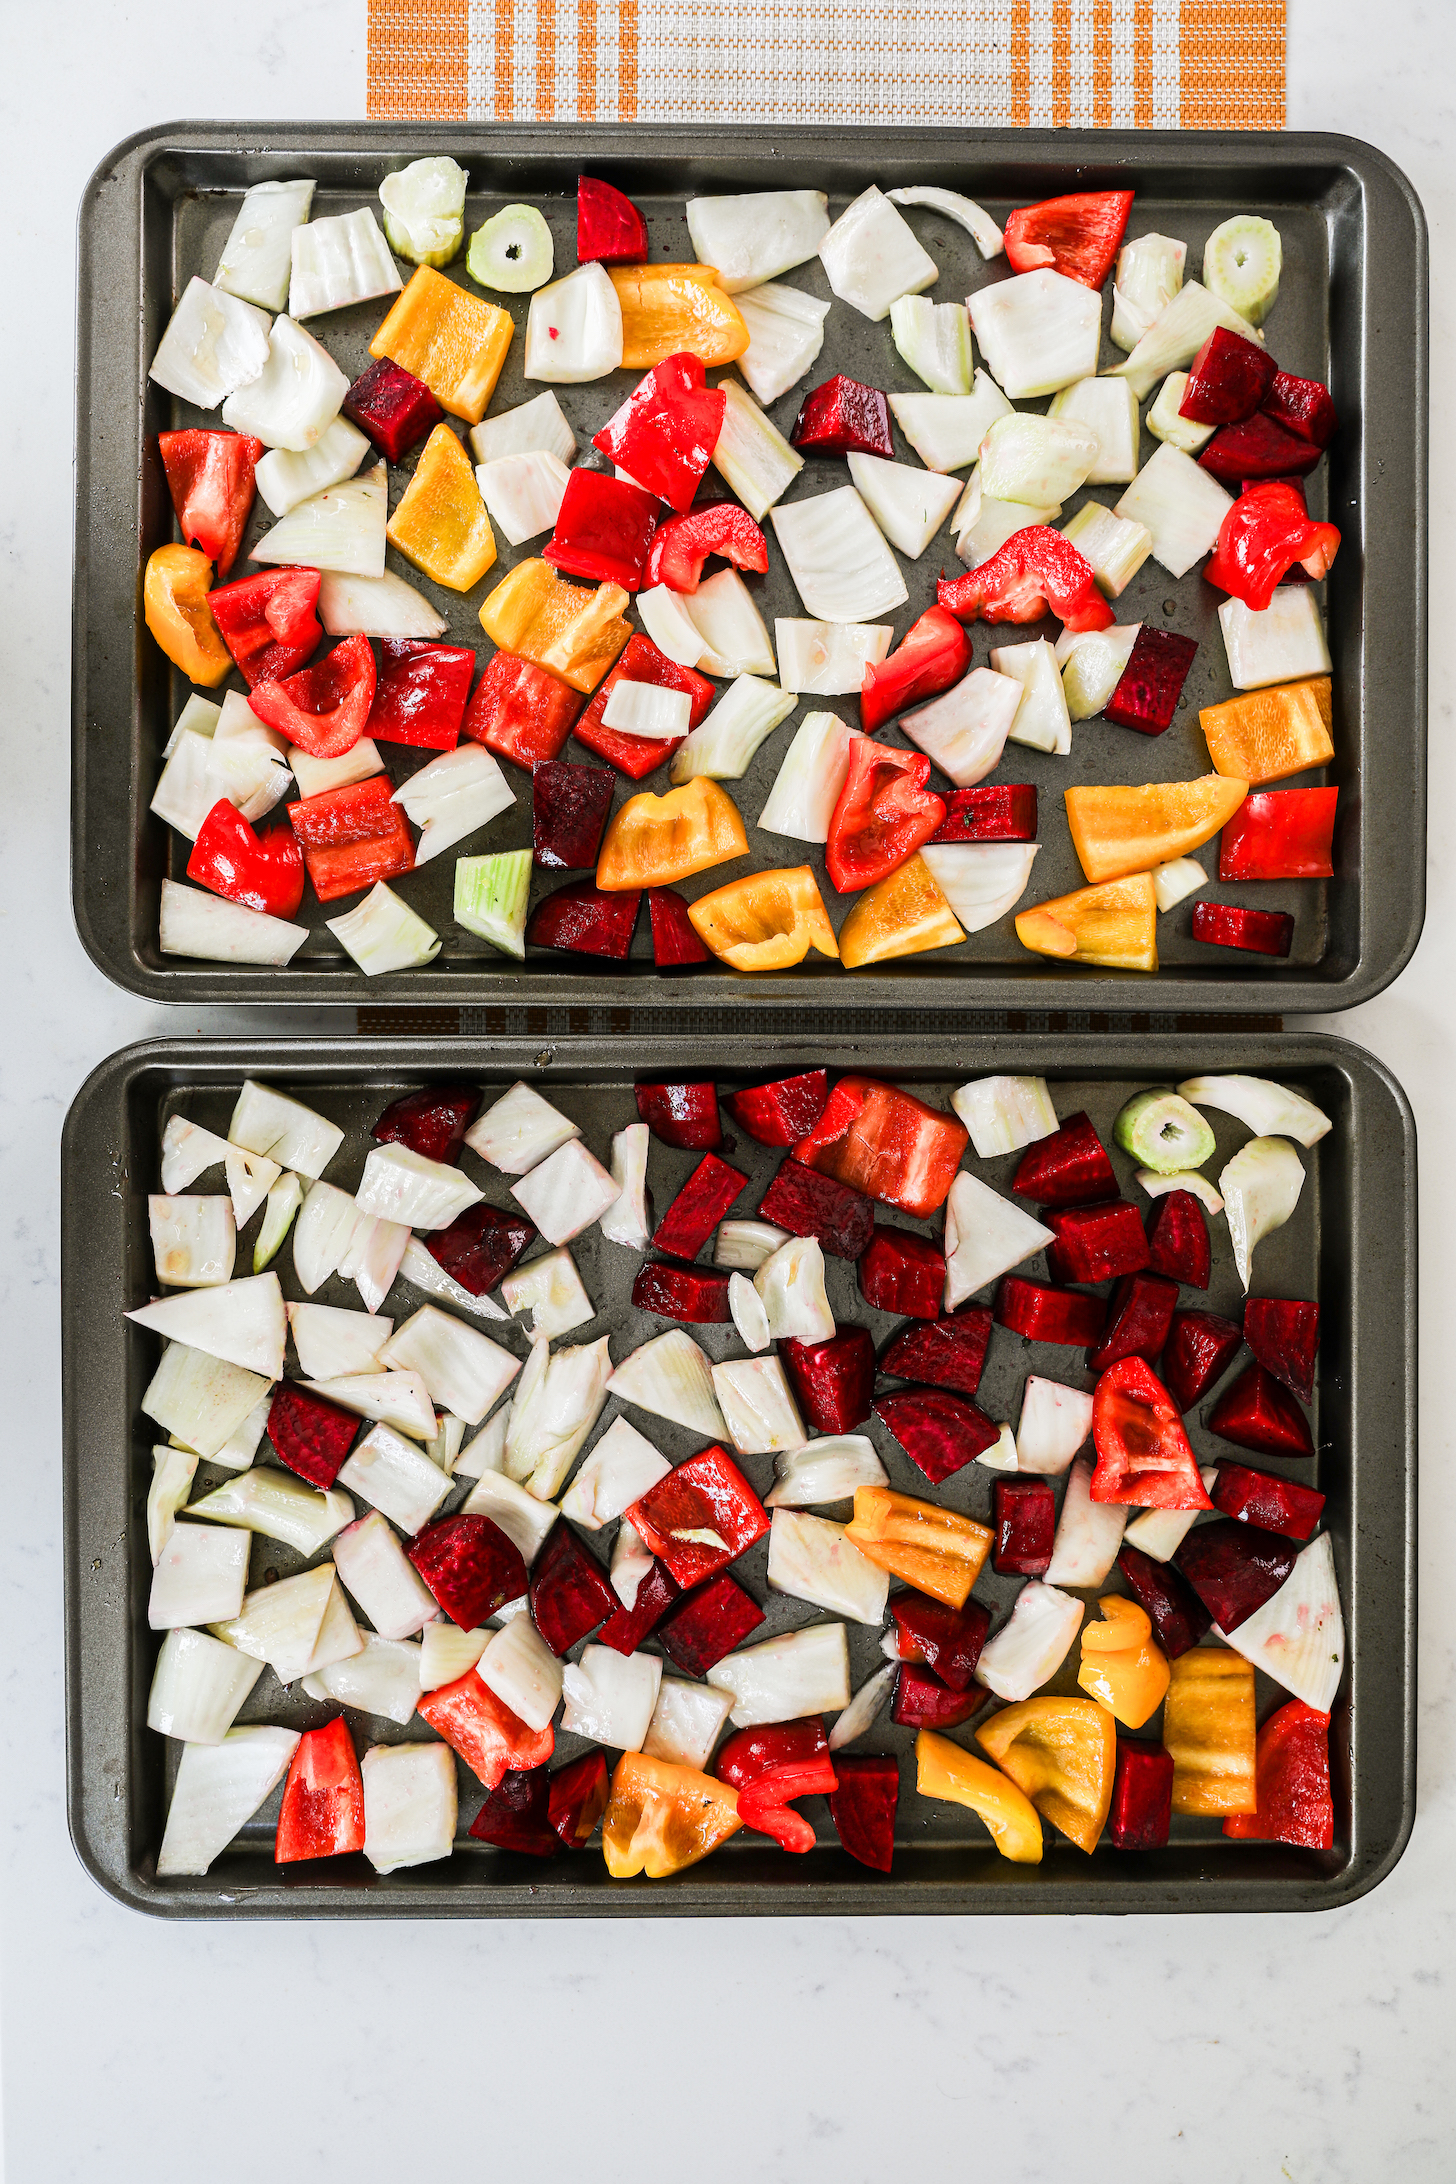 Two baking trays holding an assortment of mixed vegetables, including neatly arranged cubed beets, peppers, and fennel.